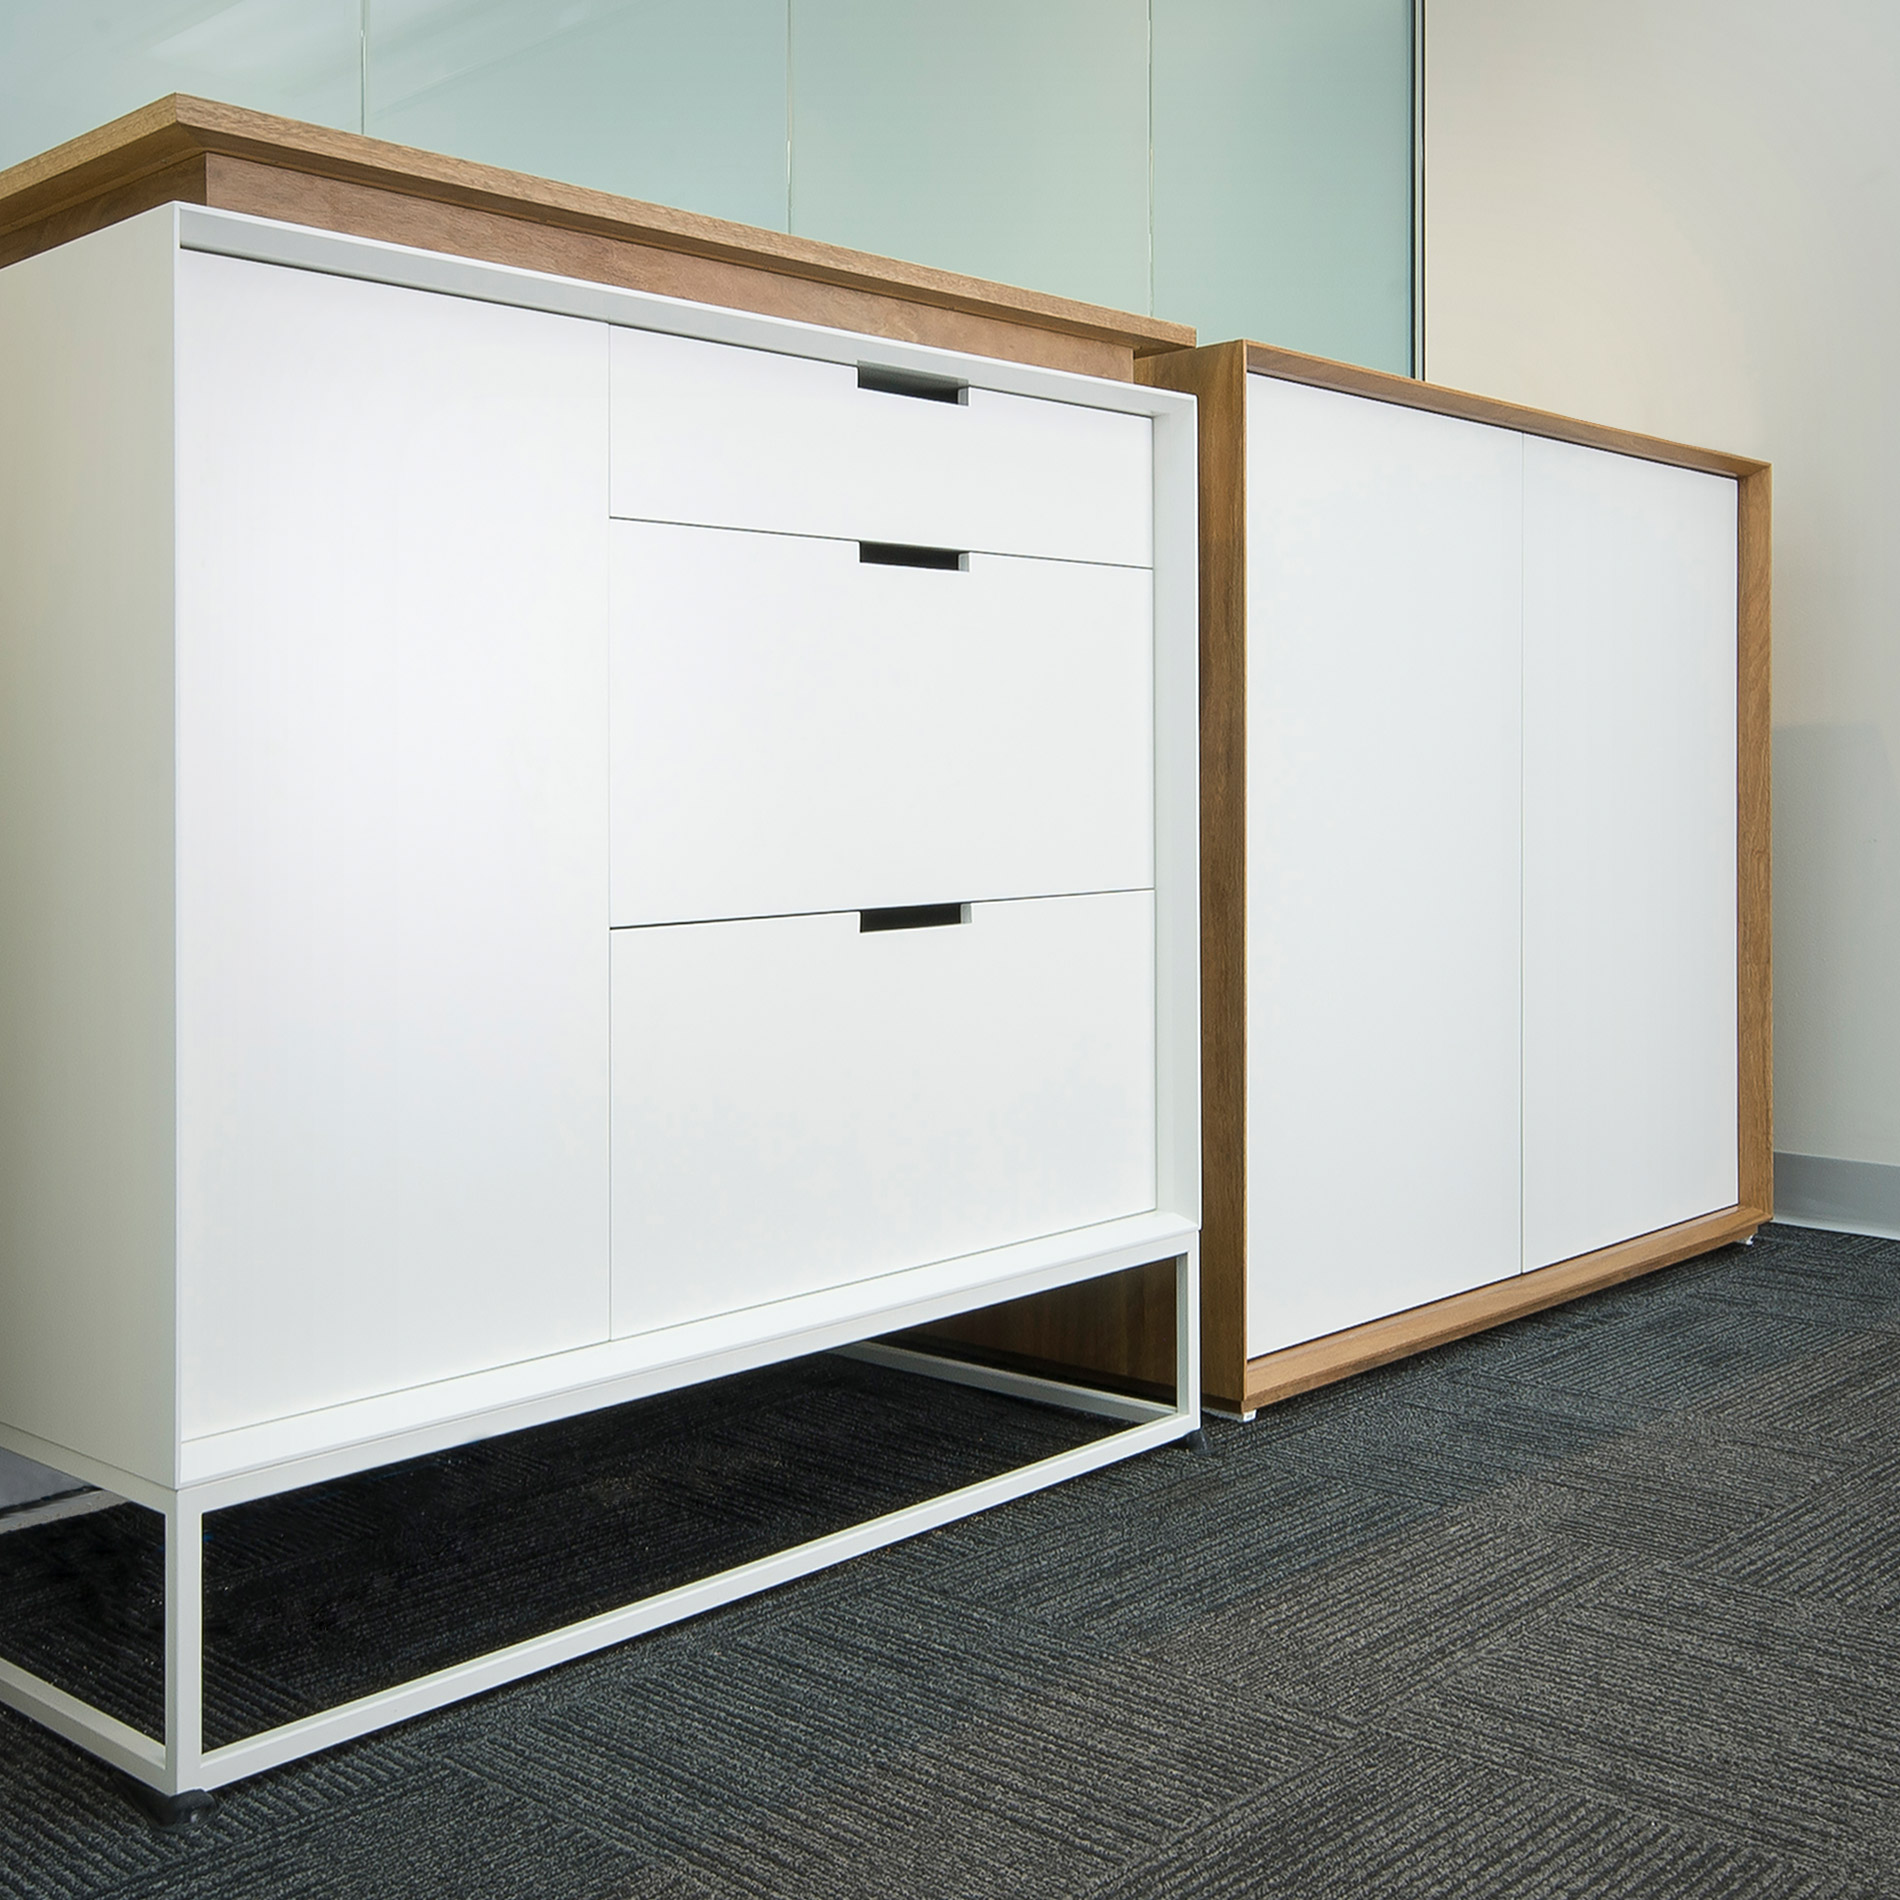 Storage is always the problem and this cleverly designed set of cabinets by Australian designer FrancoCrea resolves this for the inner city office